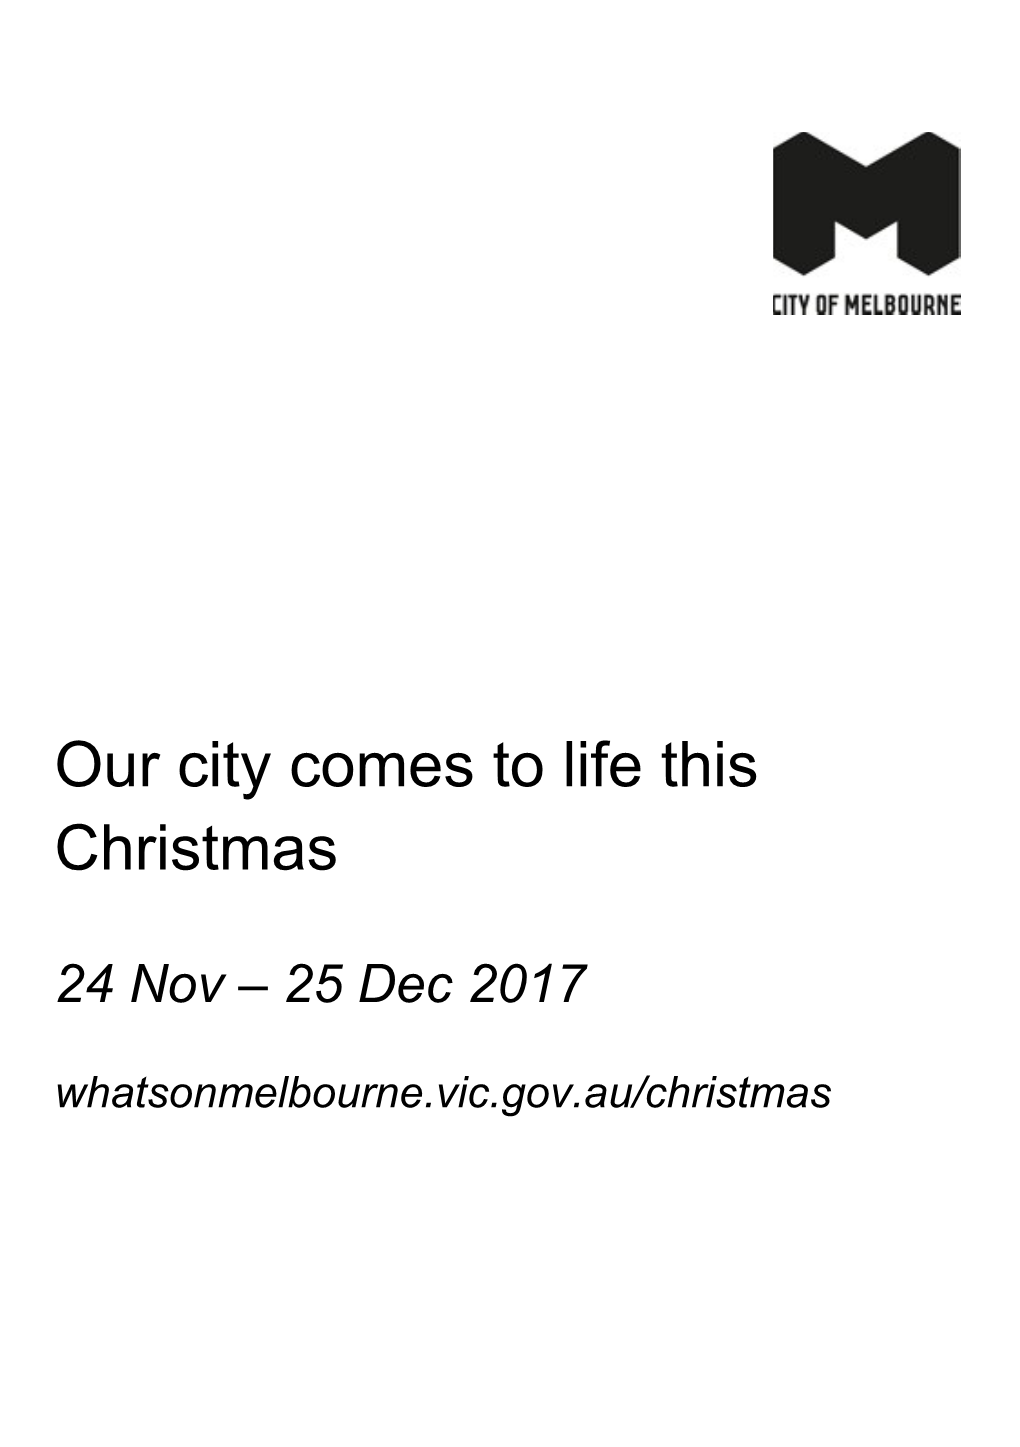 Our City Comes to Life This Christmas